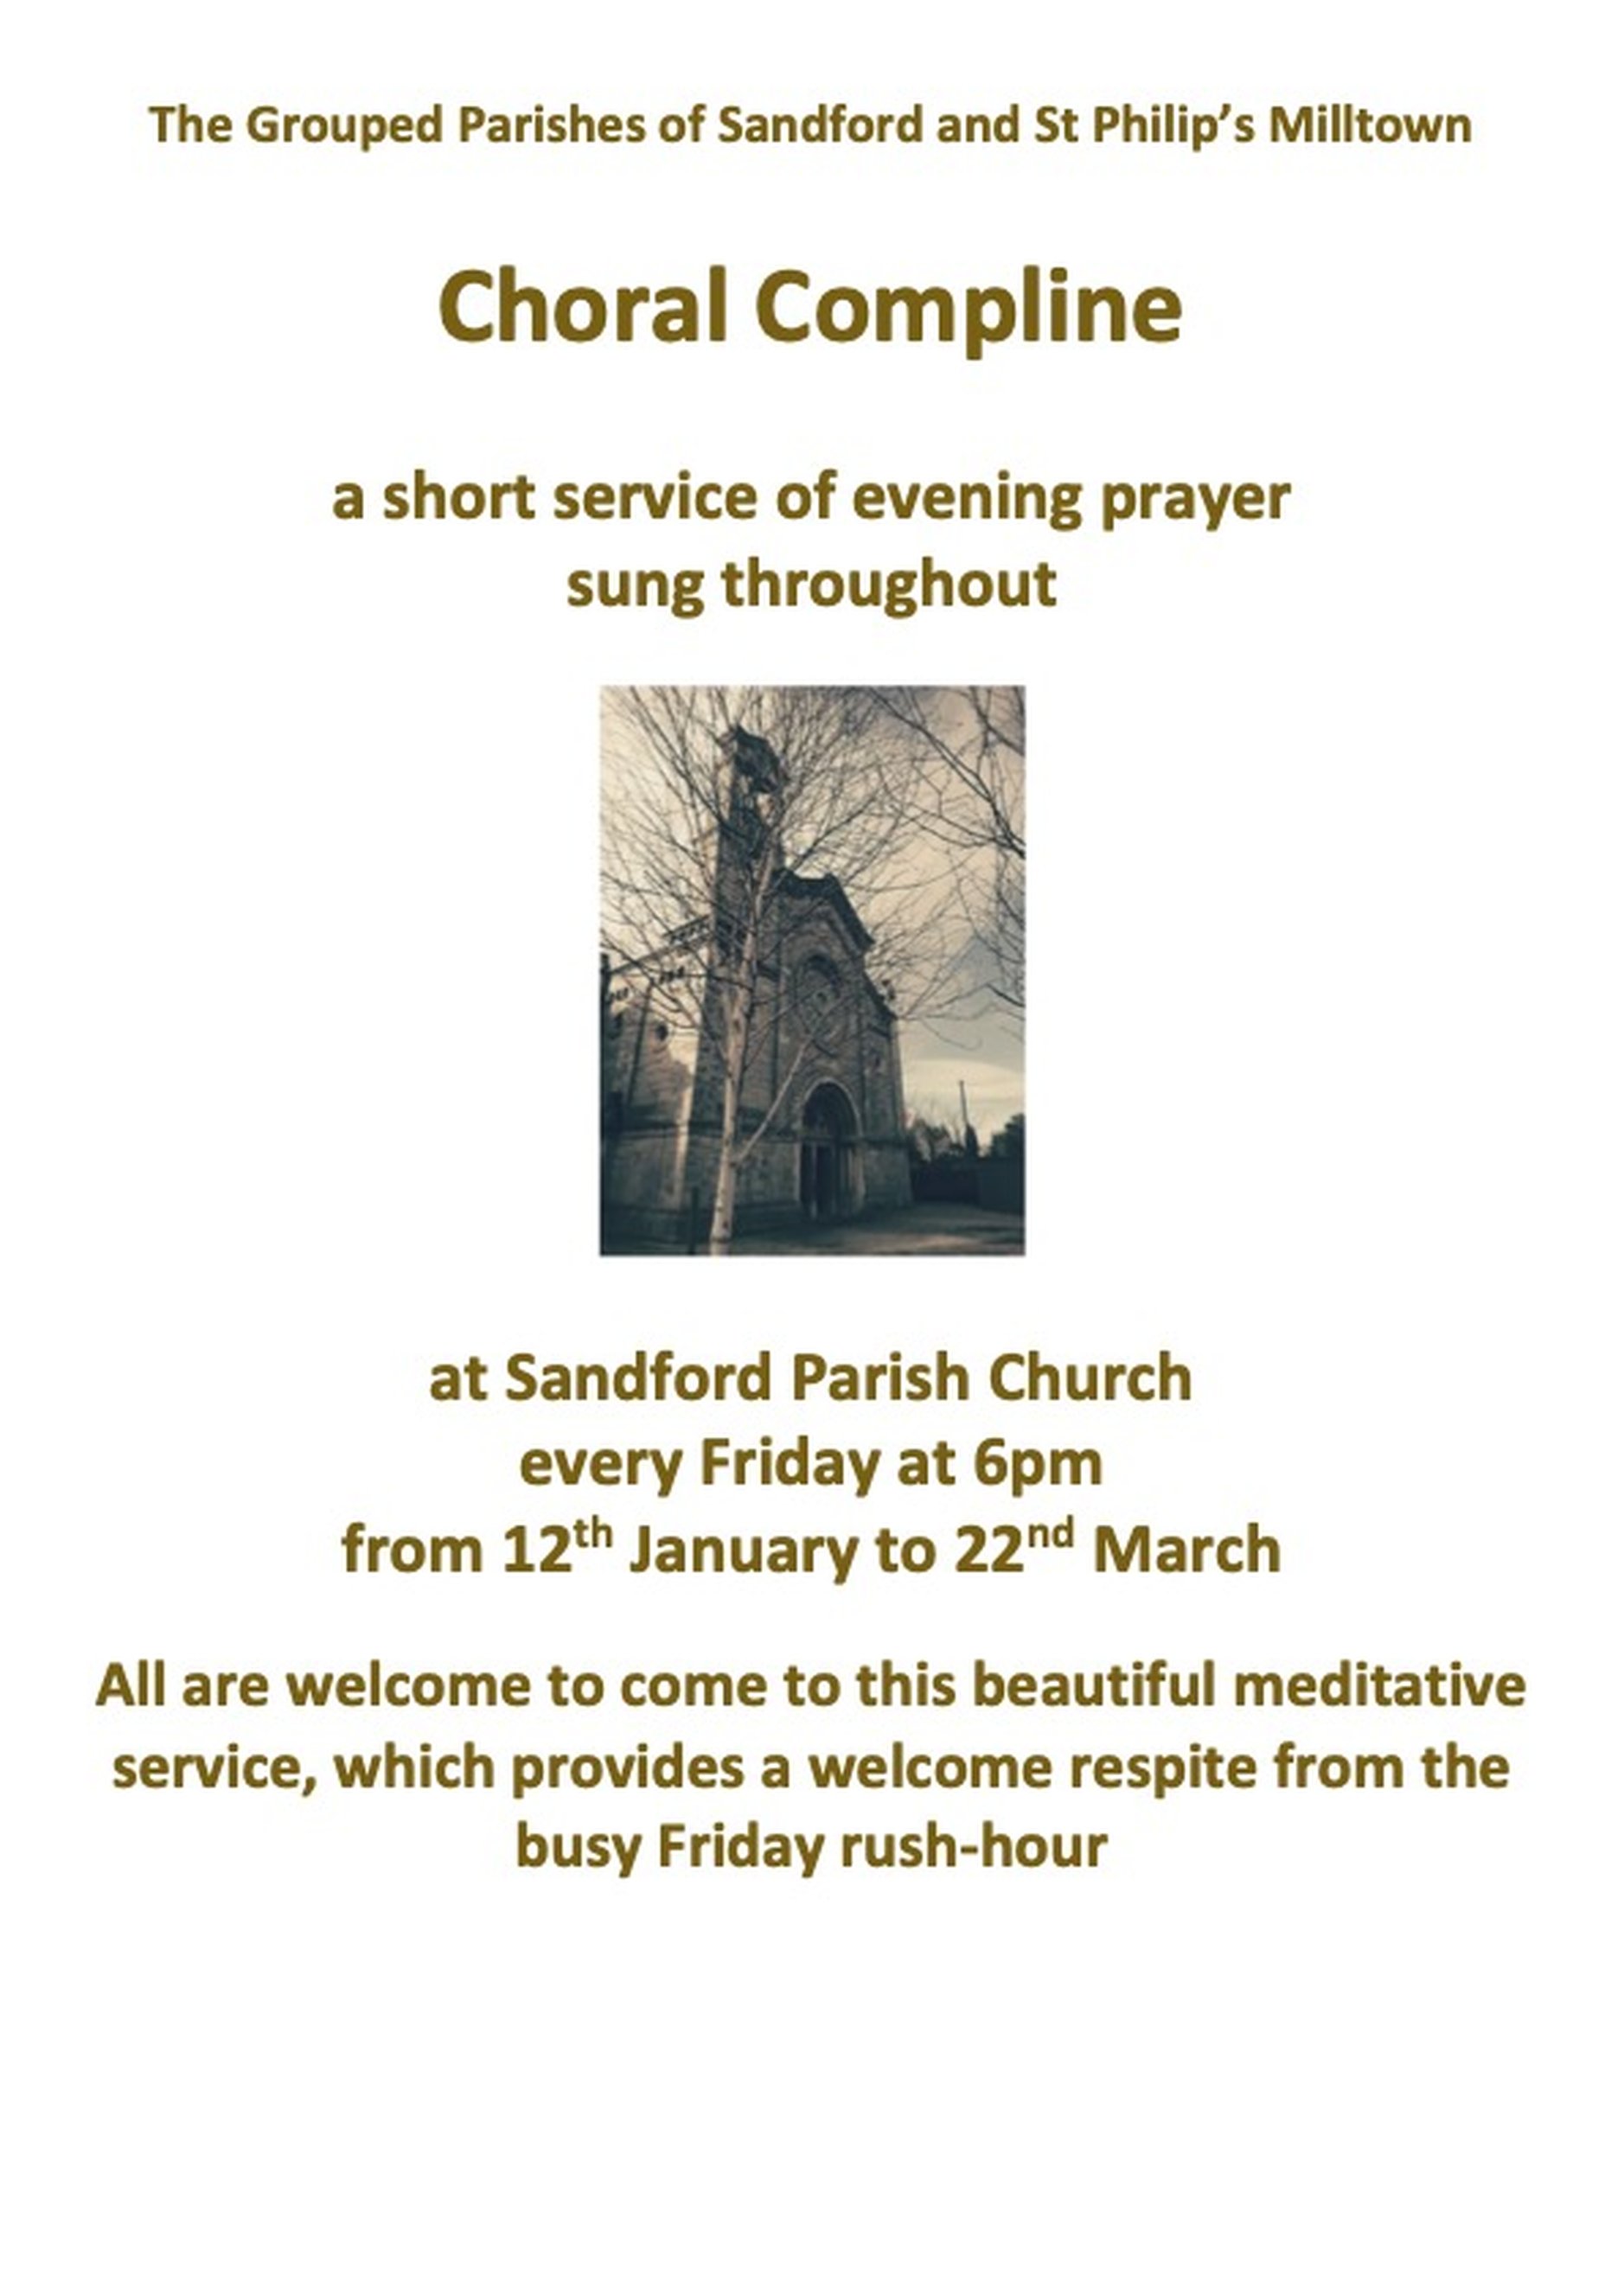 Choral Compline at Sandford Parish Church – Every Friday - Every Friday evening at 6pm from January 12 to March 22 at 6pm in Sandford Parish Church. All welcome.